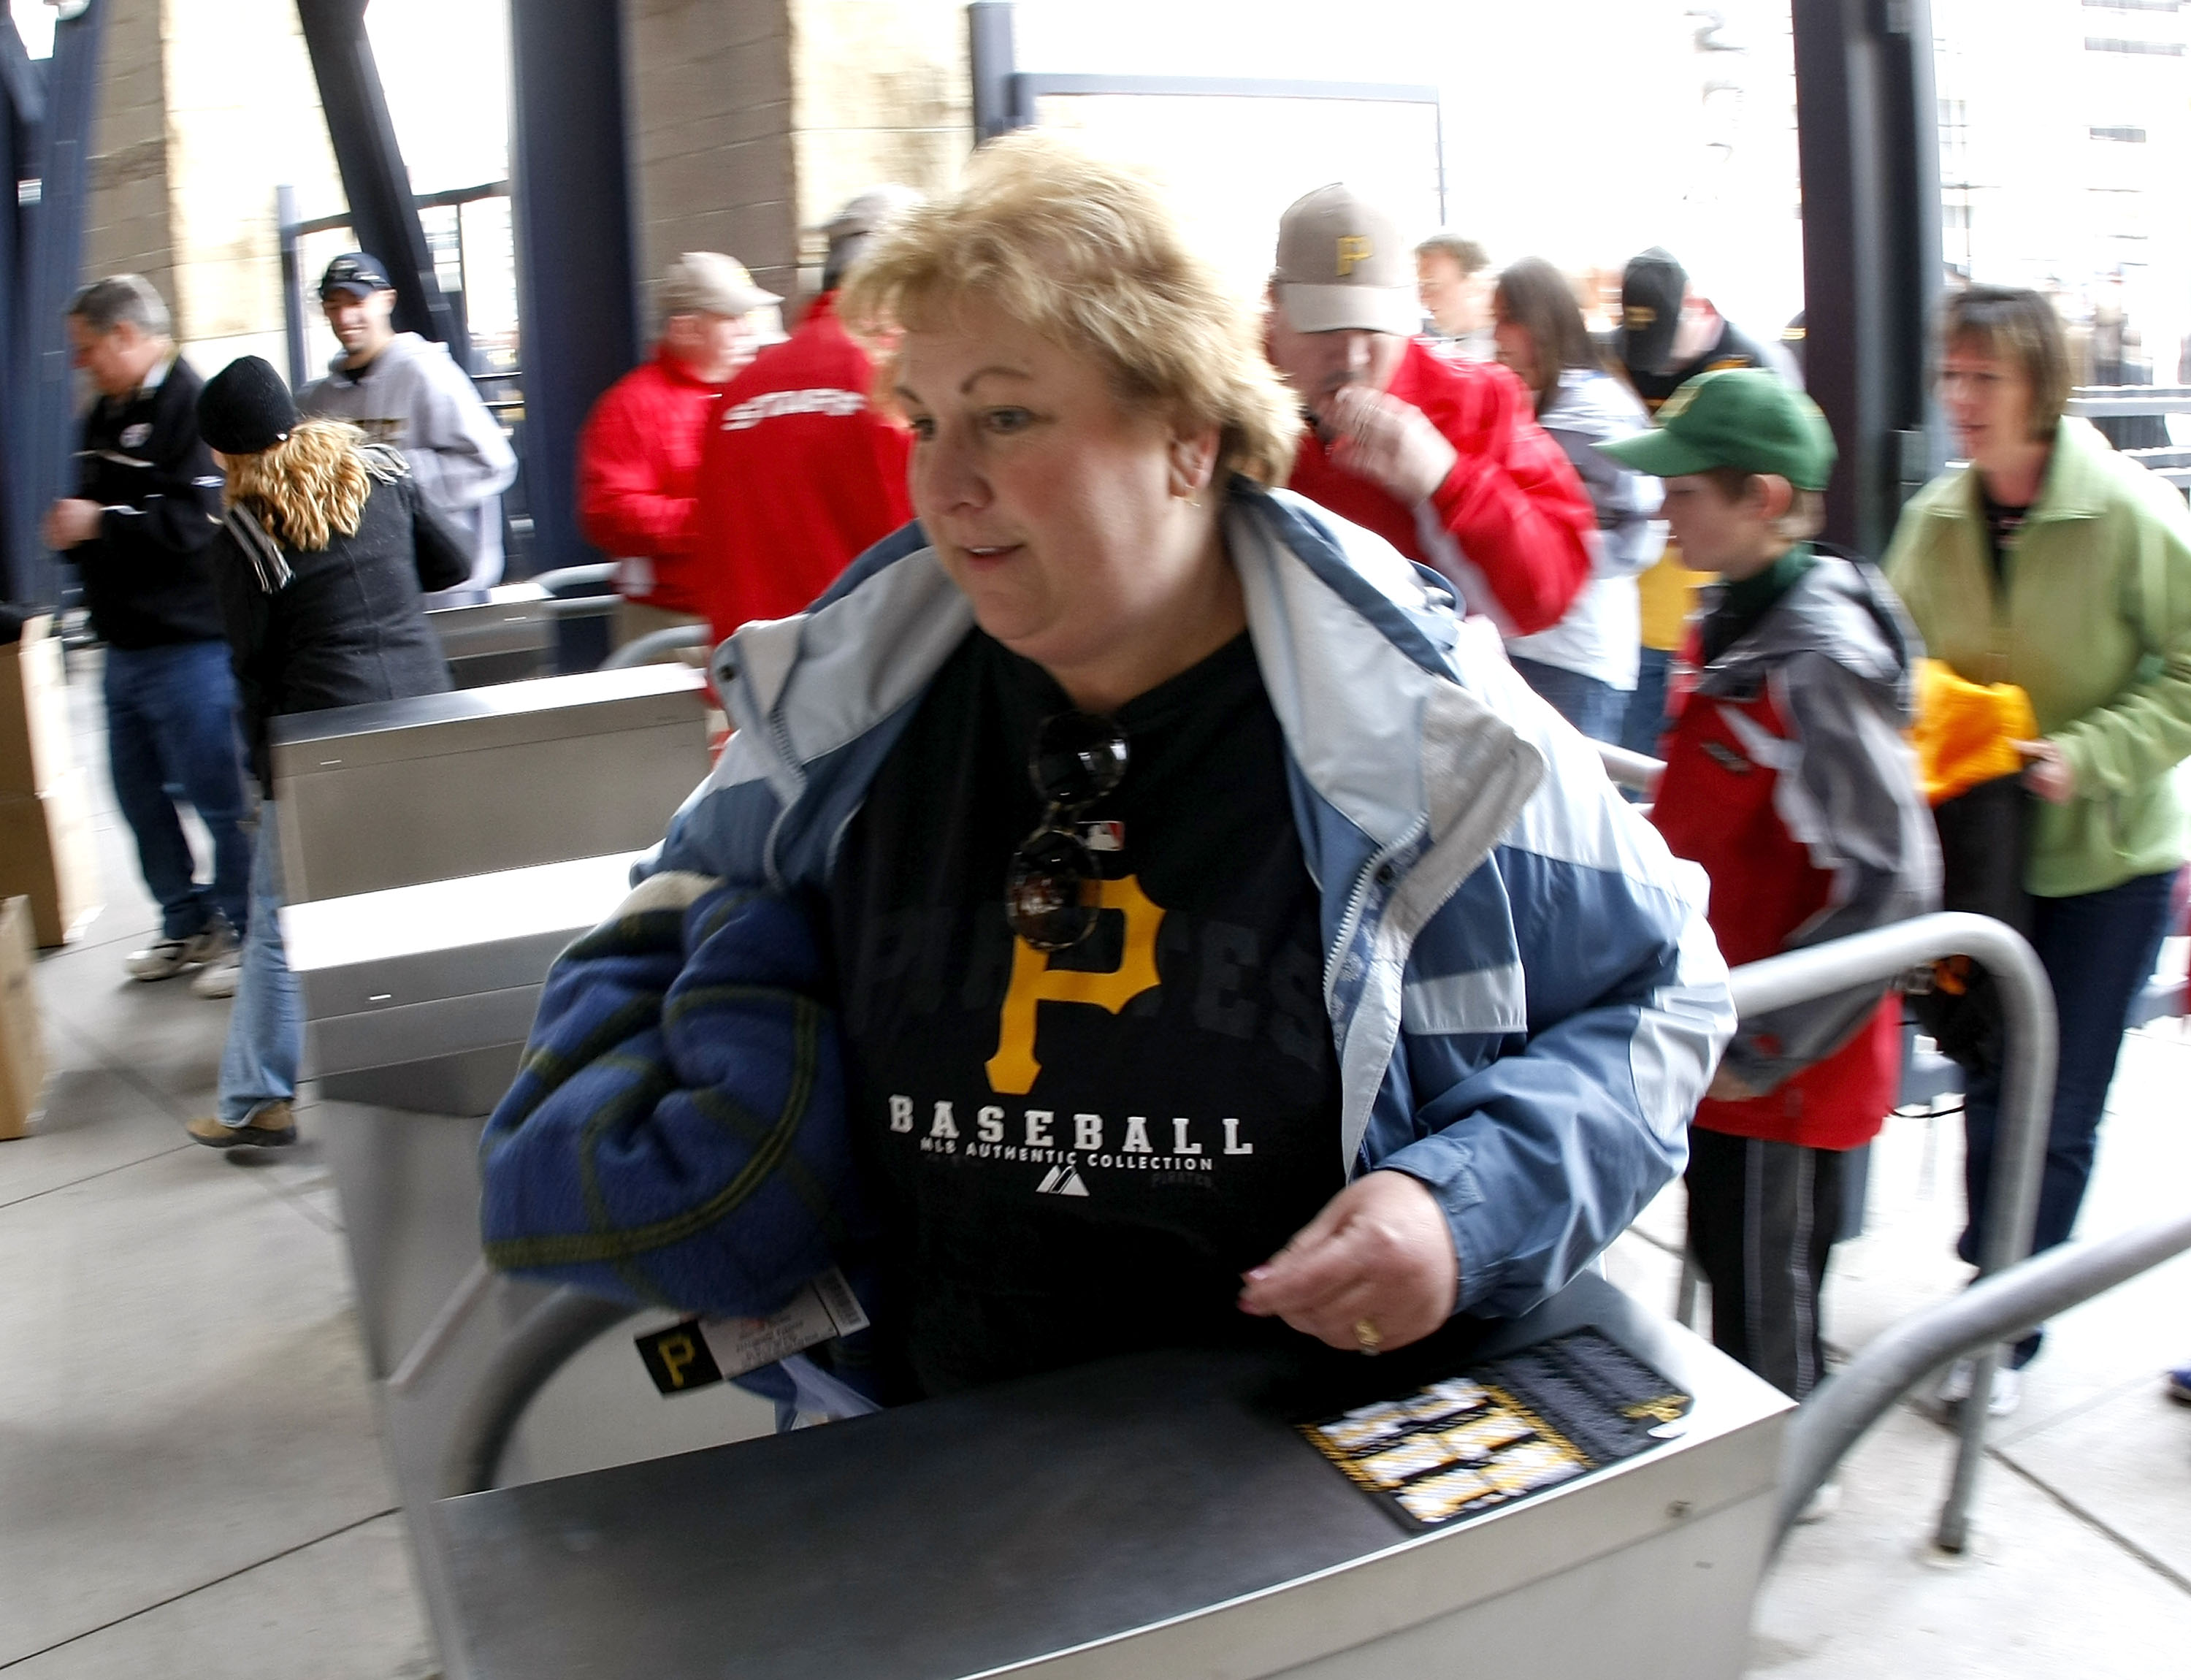 PITTSBURGH - APRIL 13:  Fans enter the ballpark on opening day for the Pittsburgh Pirates prior to playing the Houston Astros at PNC Park April 13, 2009 in Pittsburgh, Pennsylvania.  (Photo by Gregory Shamus/Getty Images)